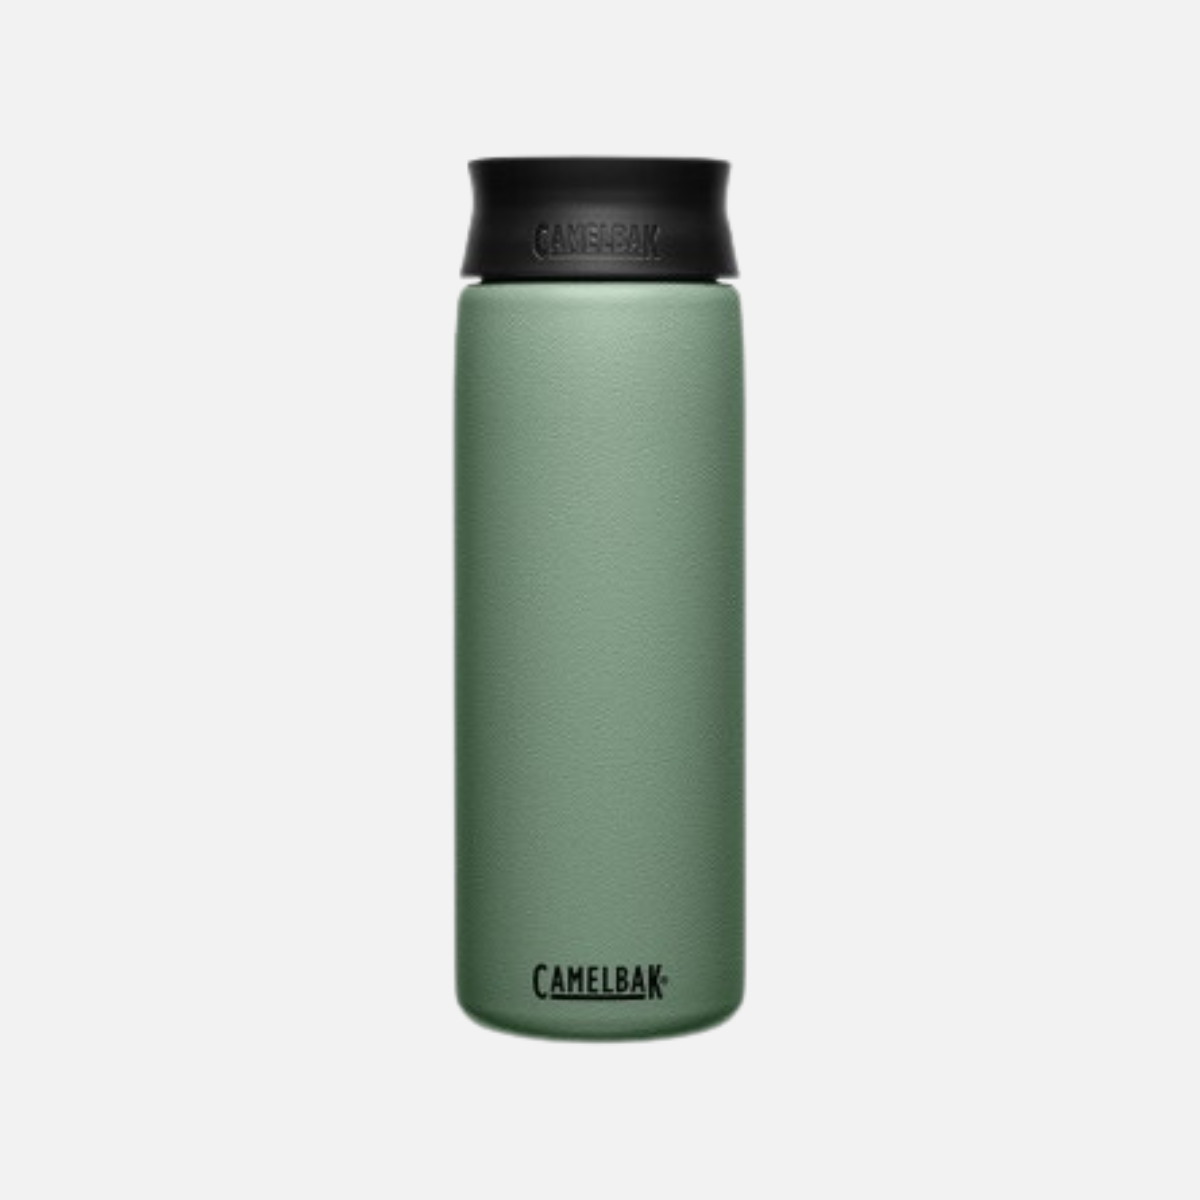 Camelbak hot cup vacuum insulated stainless steel travel mug 0.6L